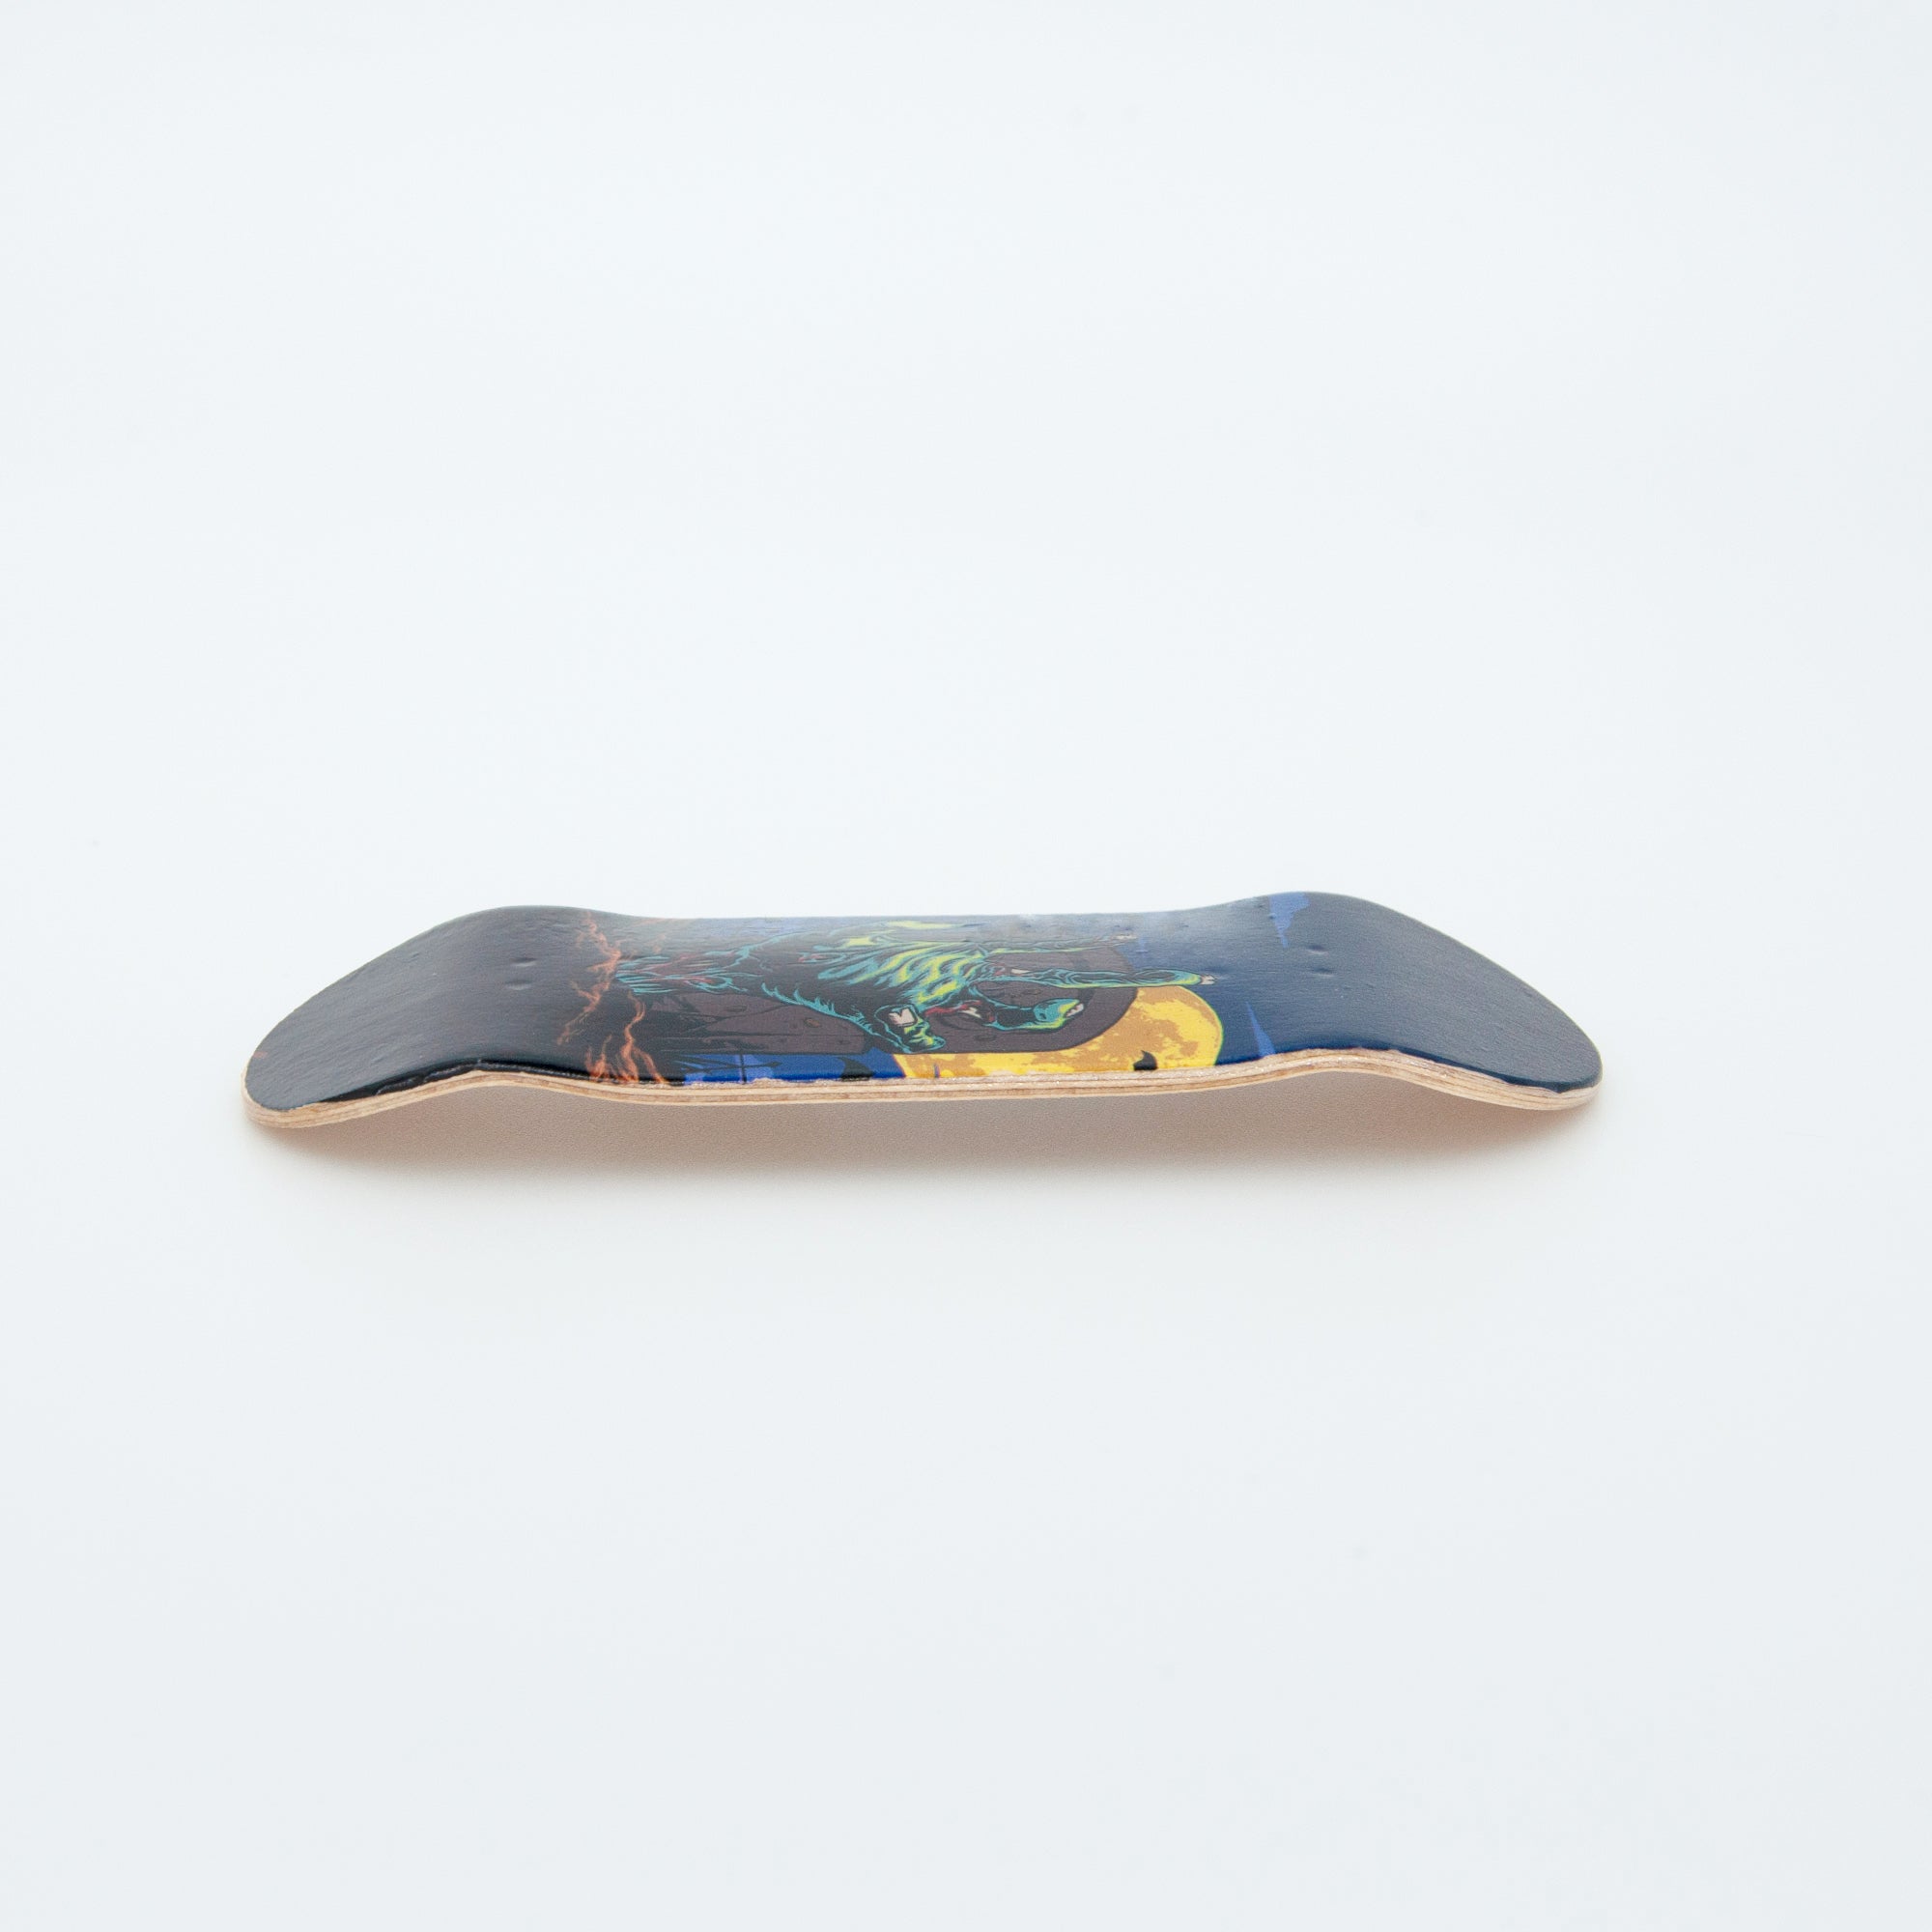 Real Wear Graphic Professional Fingerboard Deck - Zombie Hand